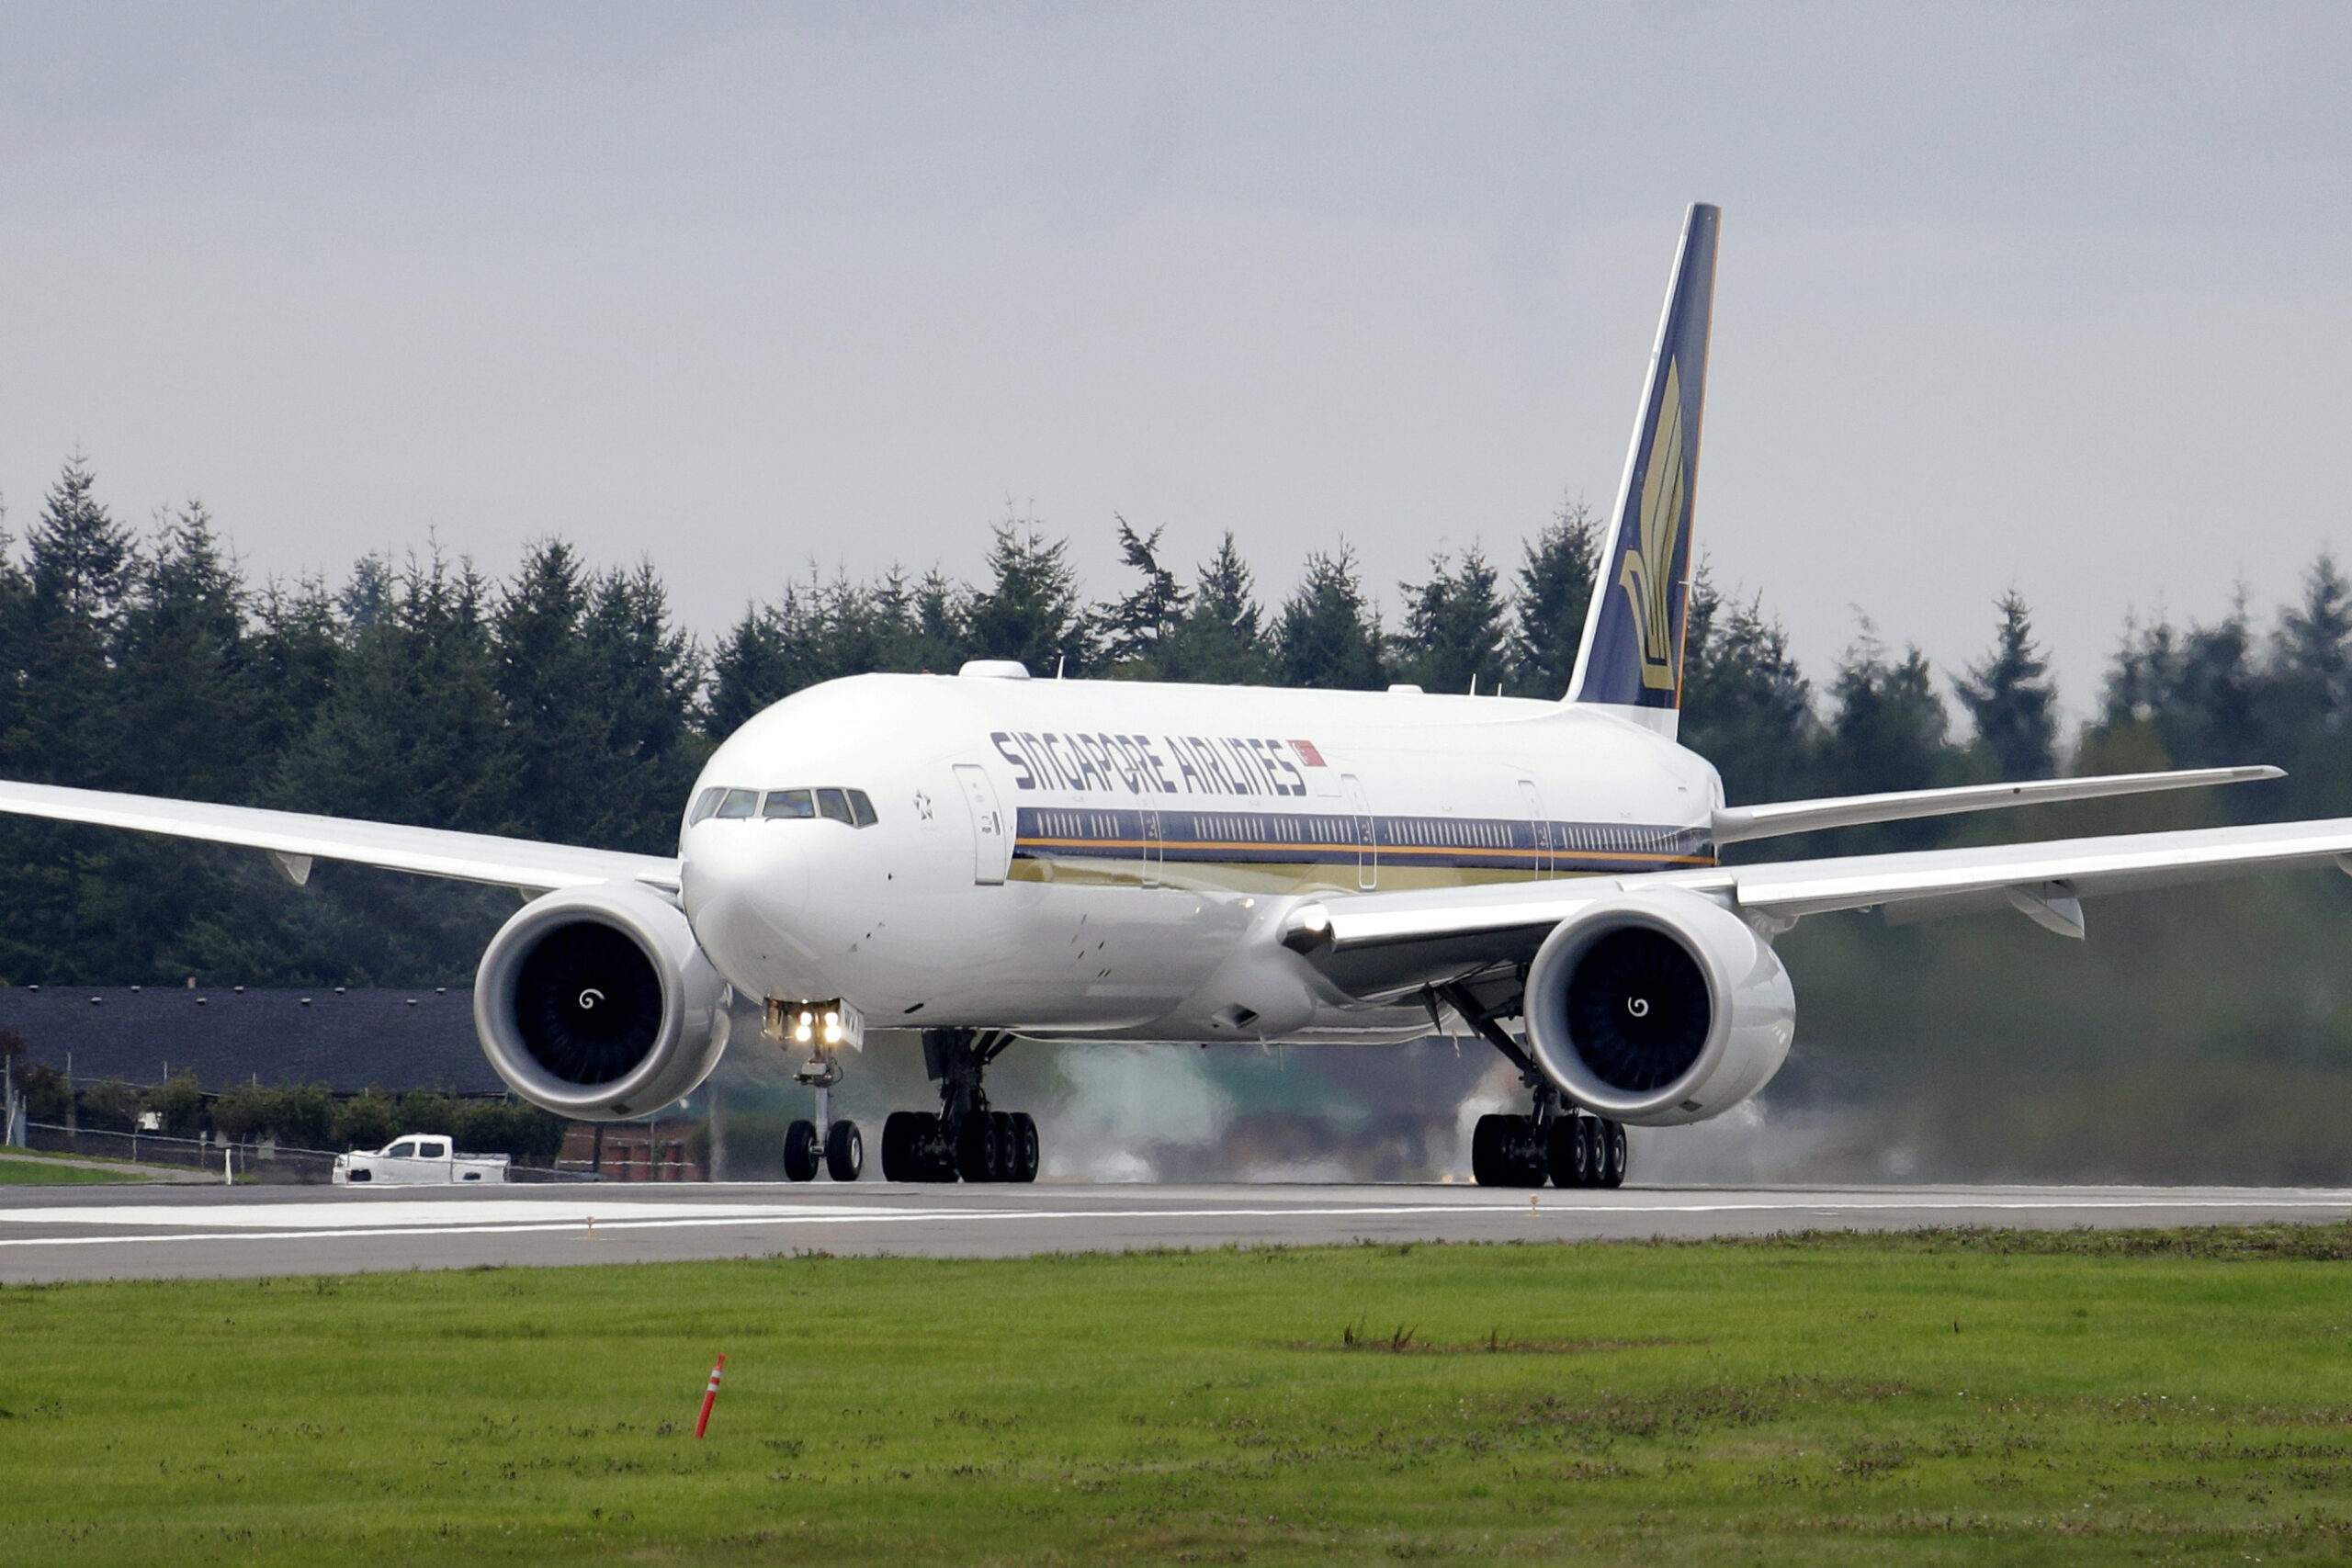 Travel Insurance ‘Will Likely’ Cover Injuries Sustained in Singapore Airlines Incident: ABI